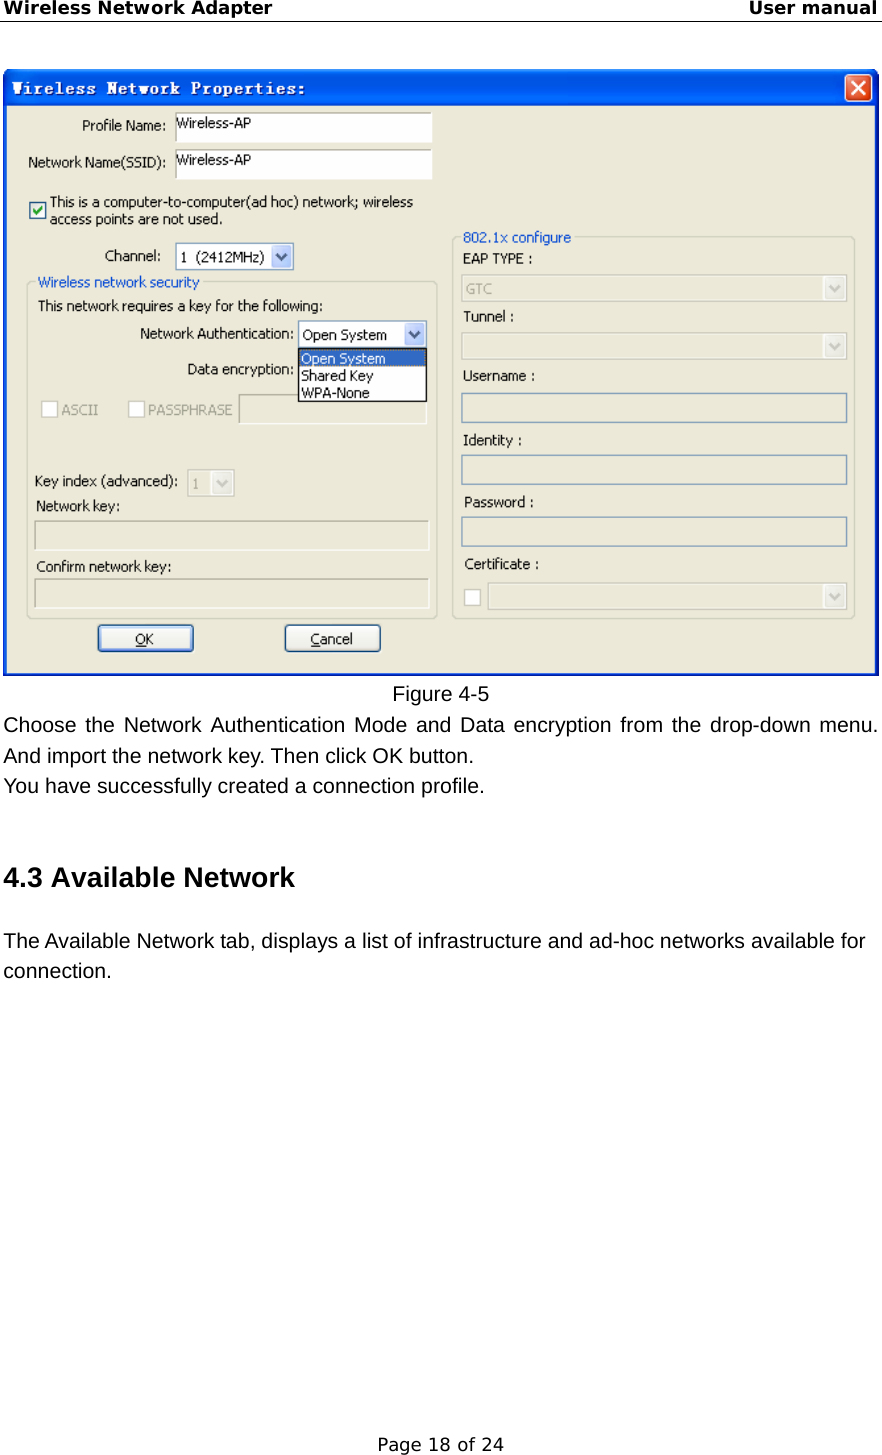 Wireless Network Adapter                                                    User manual Page 18 of 24  Figure 4-5 Choose the Network Authentication Mode and Data encryption from the drop-down menu. And import the network key. Then click OK button. You have successfully created a connection profile.  4.3 Available Network The Available Network tab, displays a list of infrastructure and ad-hoc networks available for connection.  